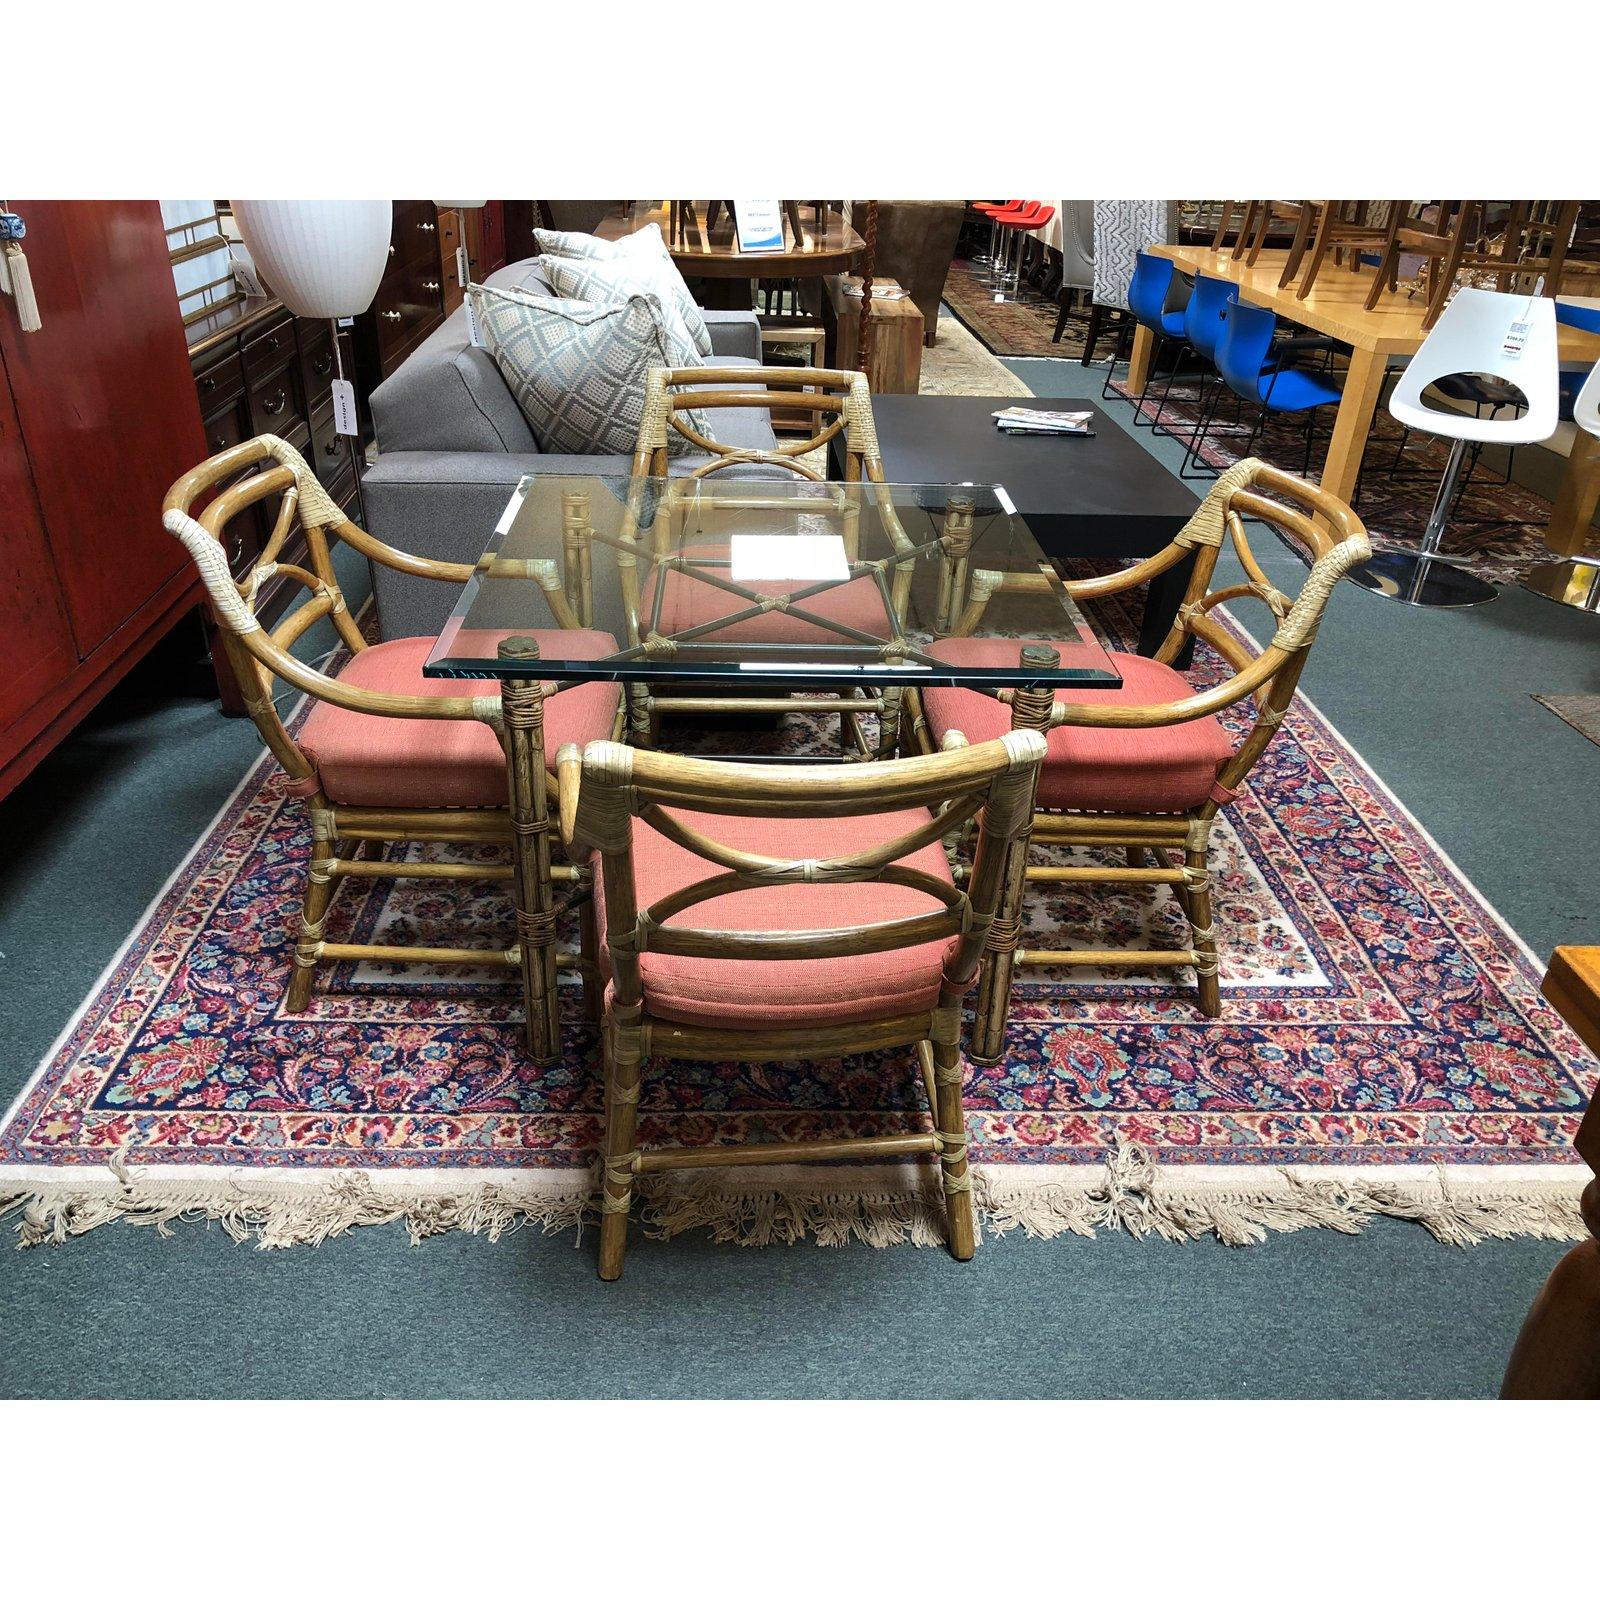 A set of four Regency armchairs by McGuire. Beautifully constructed of rattan accented with raw hide leather straps, the chairs work for dining or for other seating arrangements. The slightly rounded back adds to comfort and beauty. Loose seat